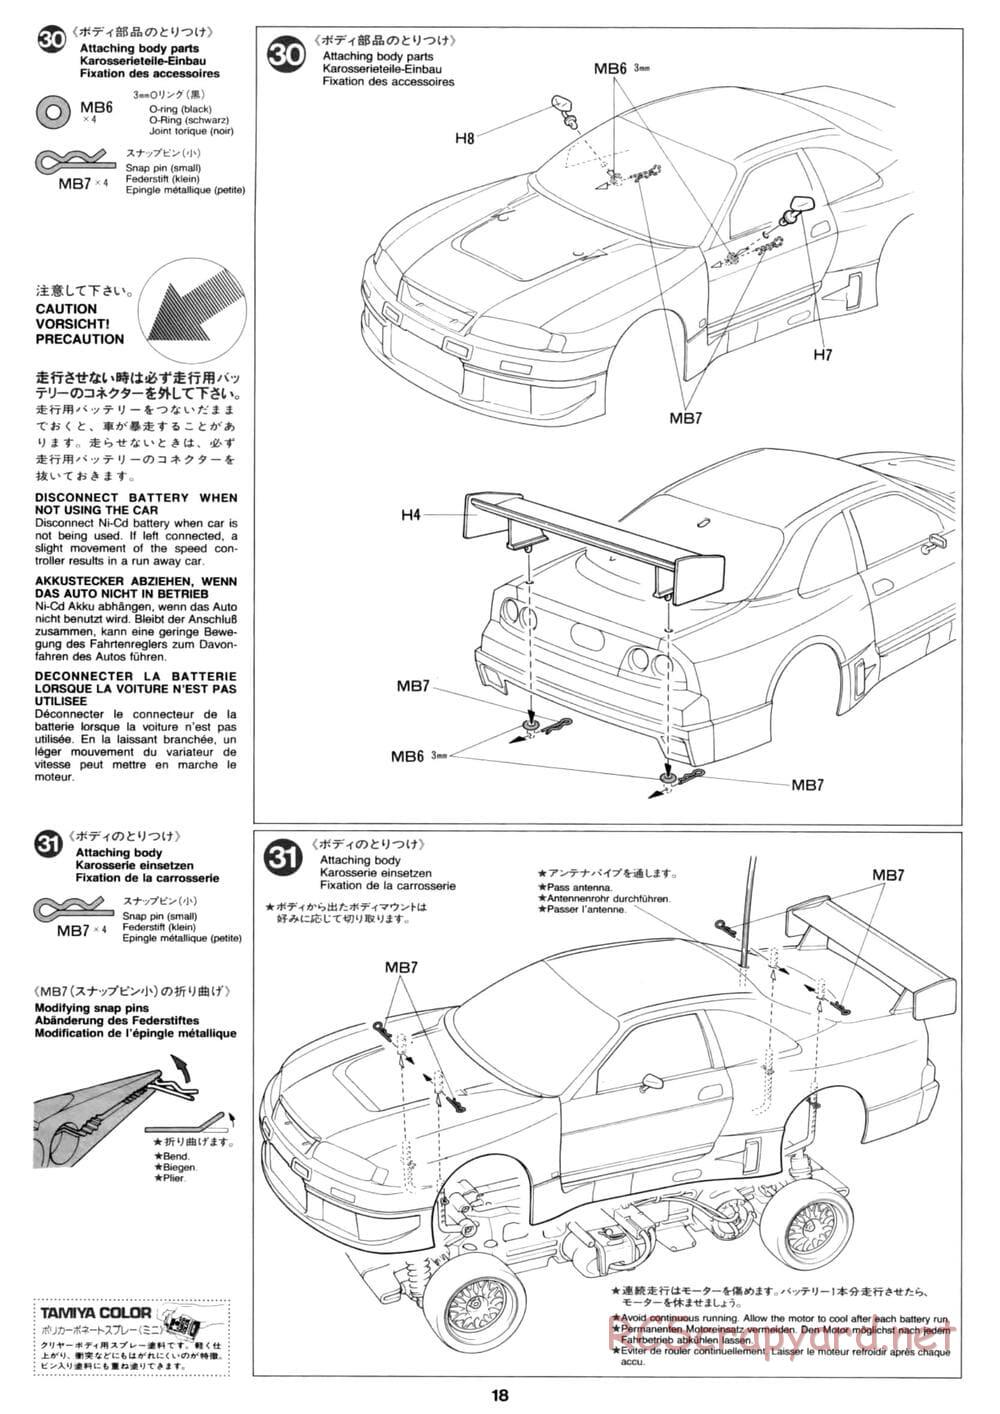 Tamiya - Calsonic Skyline GT-R - TL-01 Chassis - Manual - Page 18